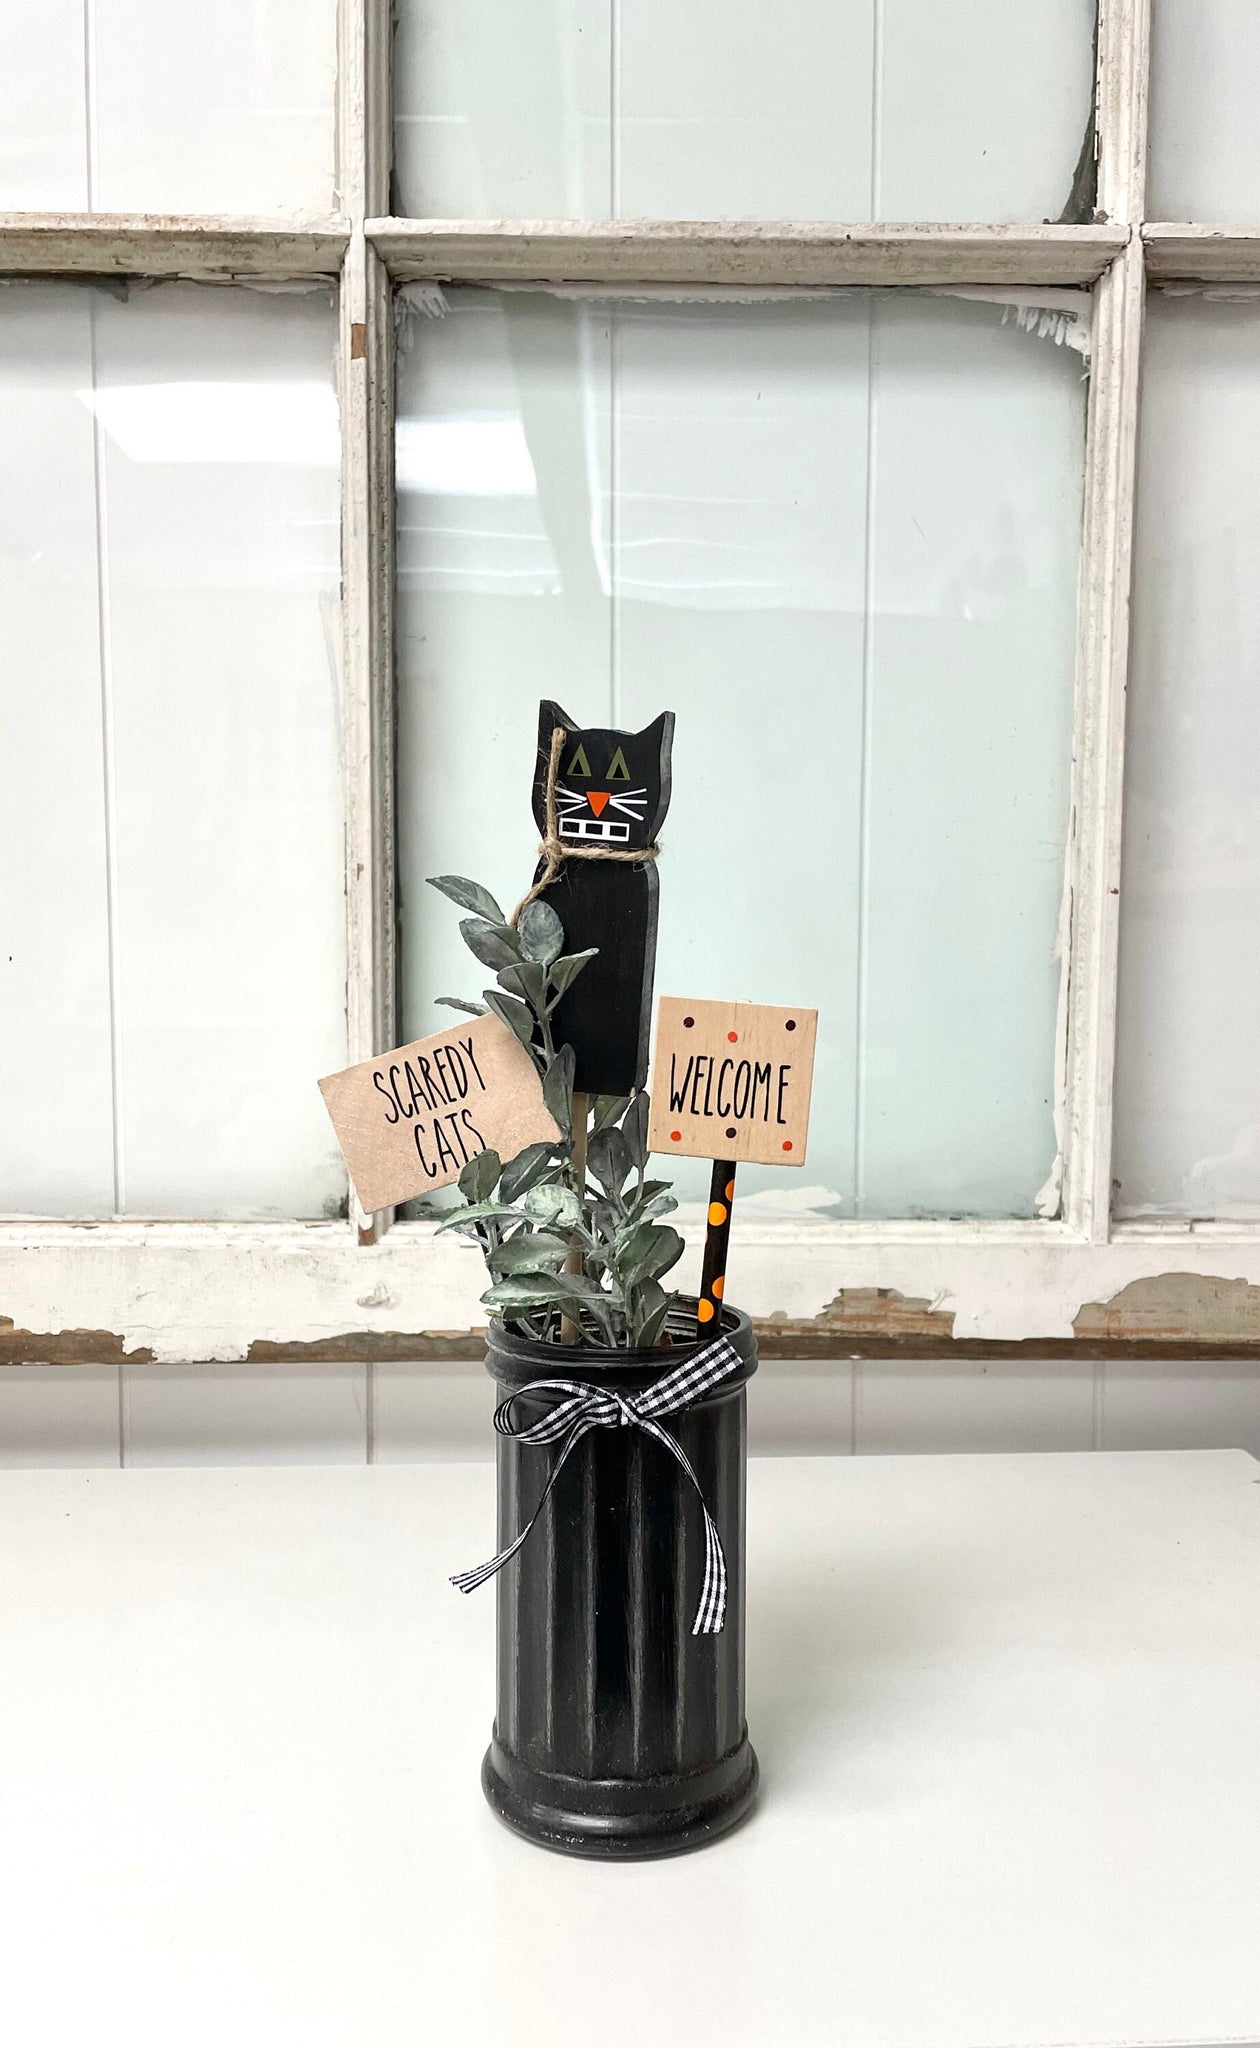 Halloween vase with wood black cat, Halloween decor, Tiered tray, Party centerpiece, Scaredy cats welcome, Halloween signs, Cat decor